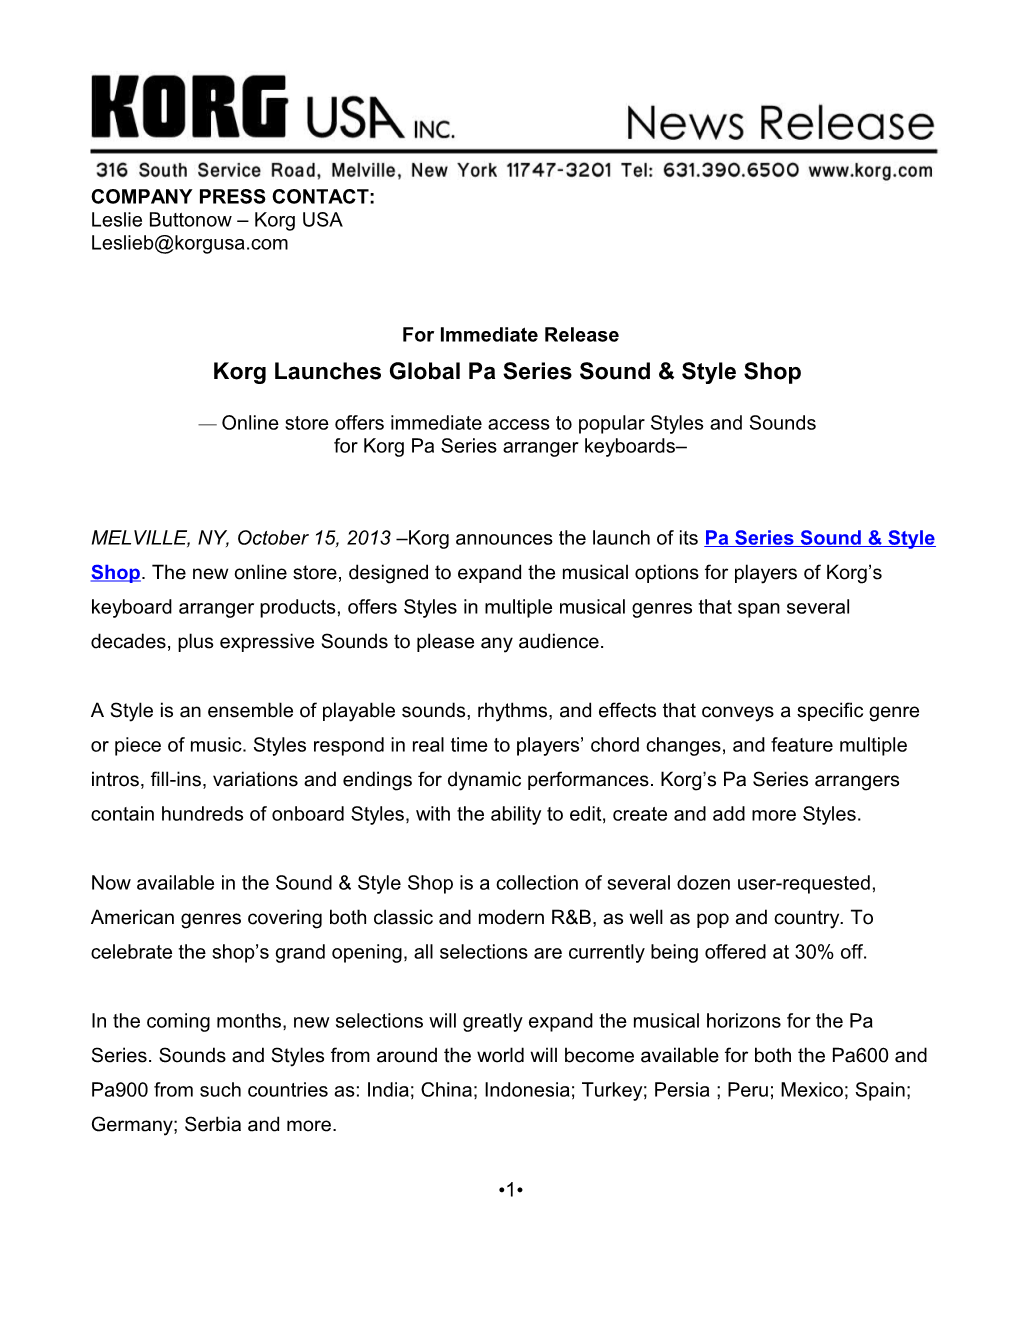 Korg Launches Global Pa Series Sound Style Shop